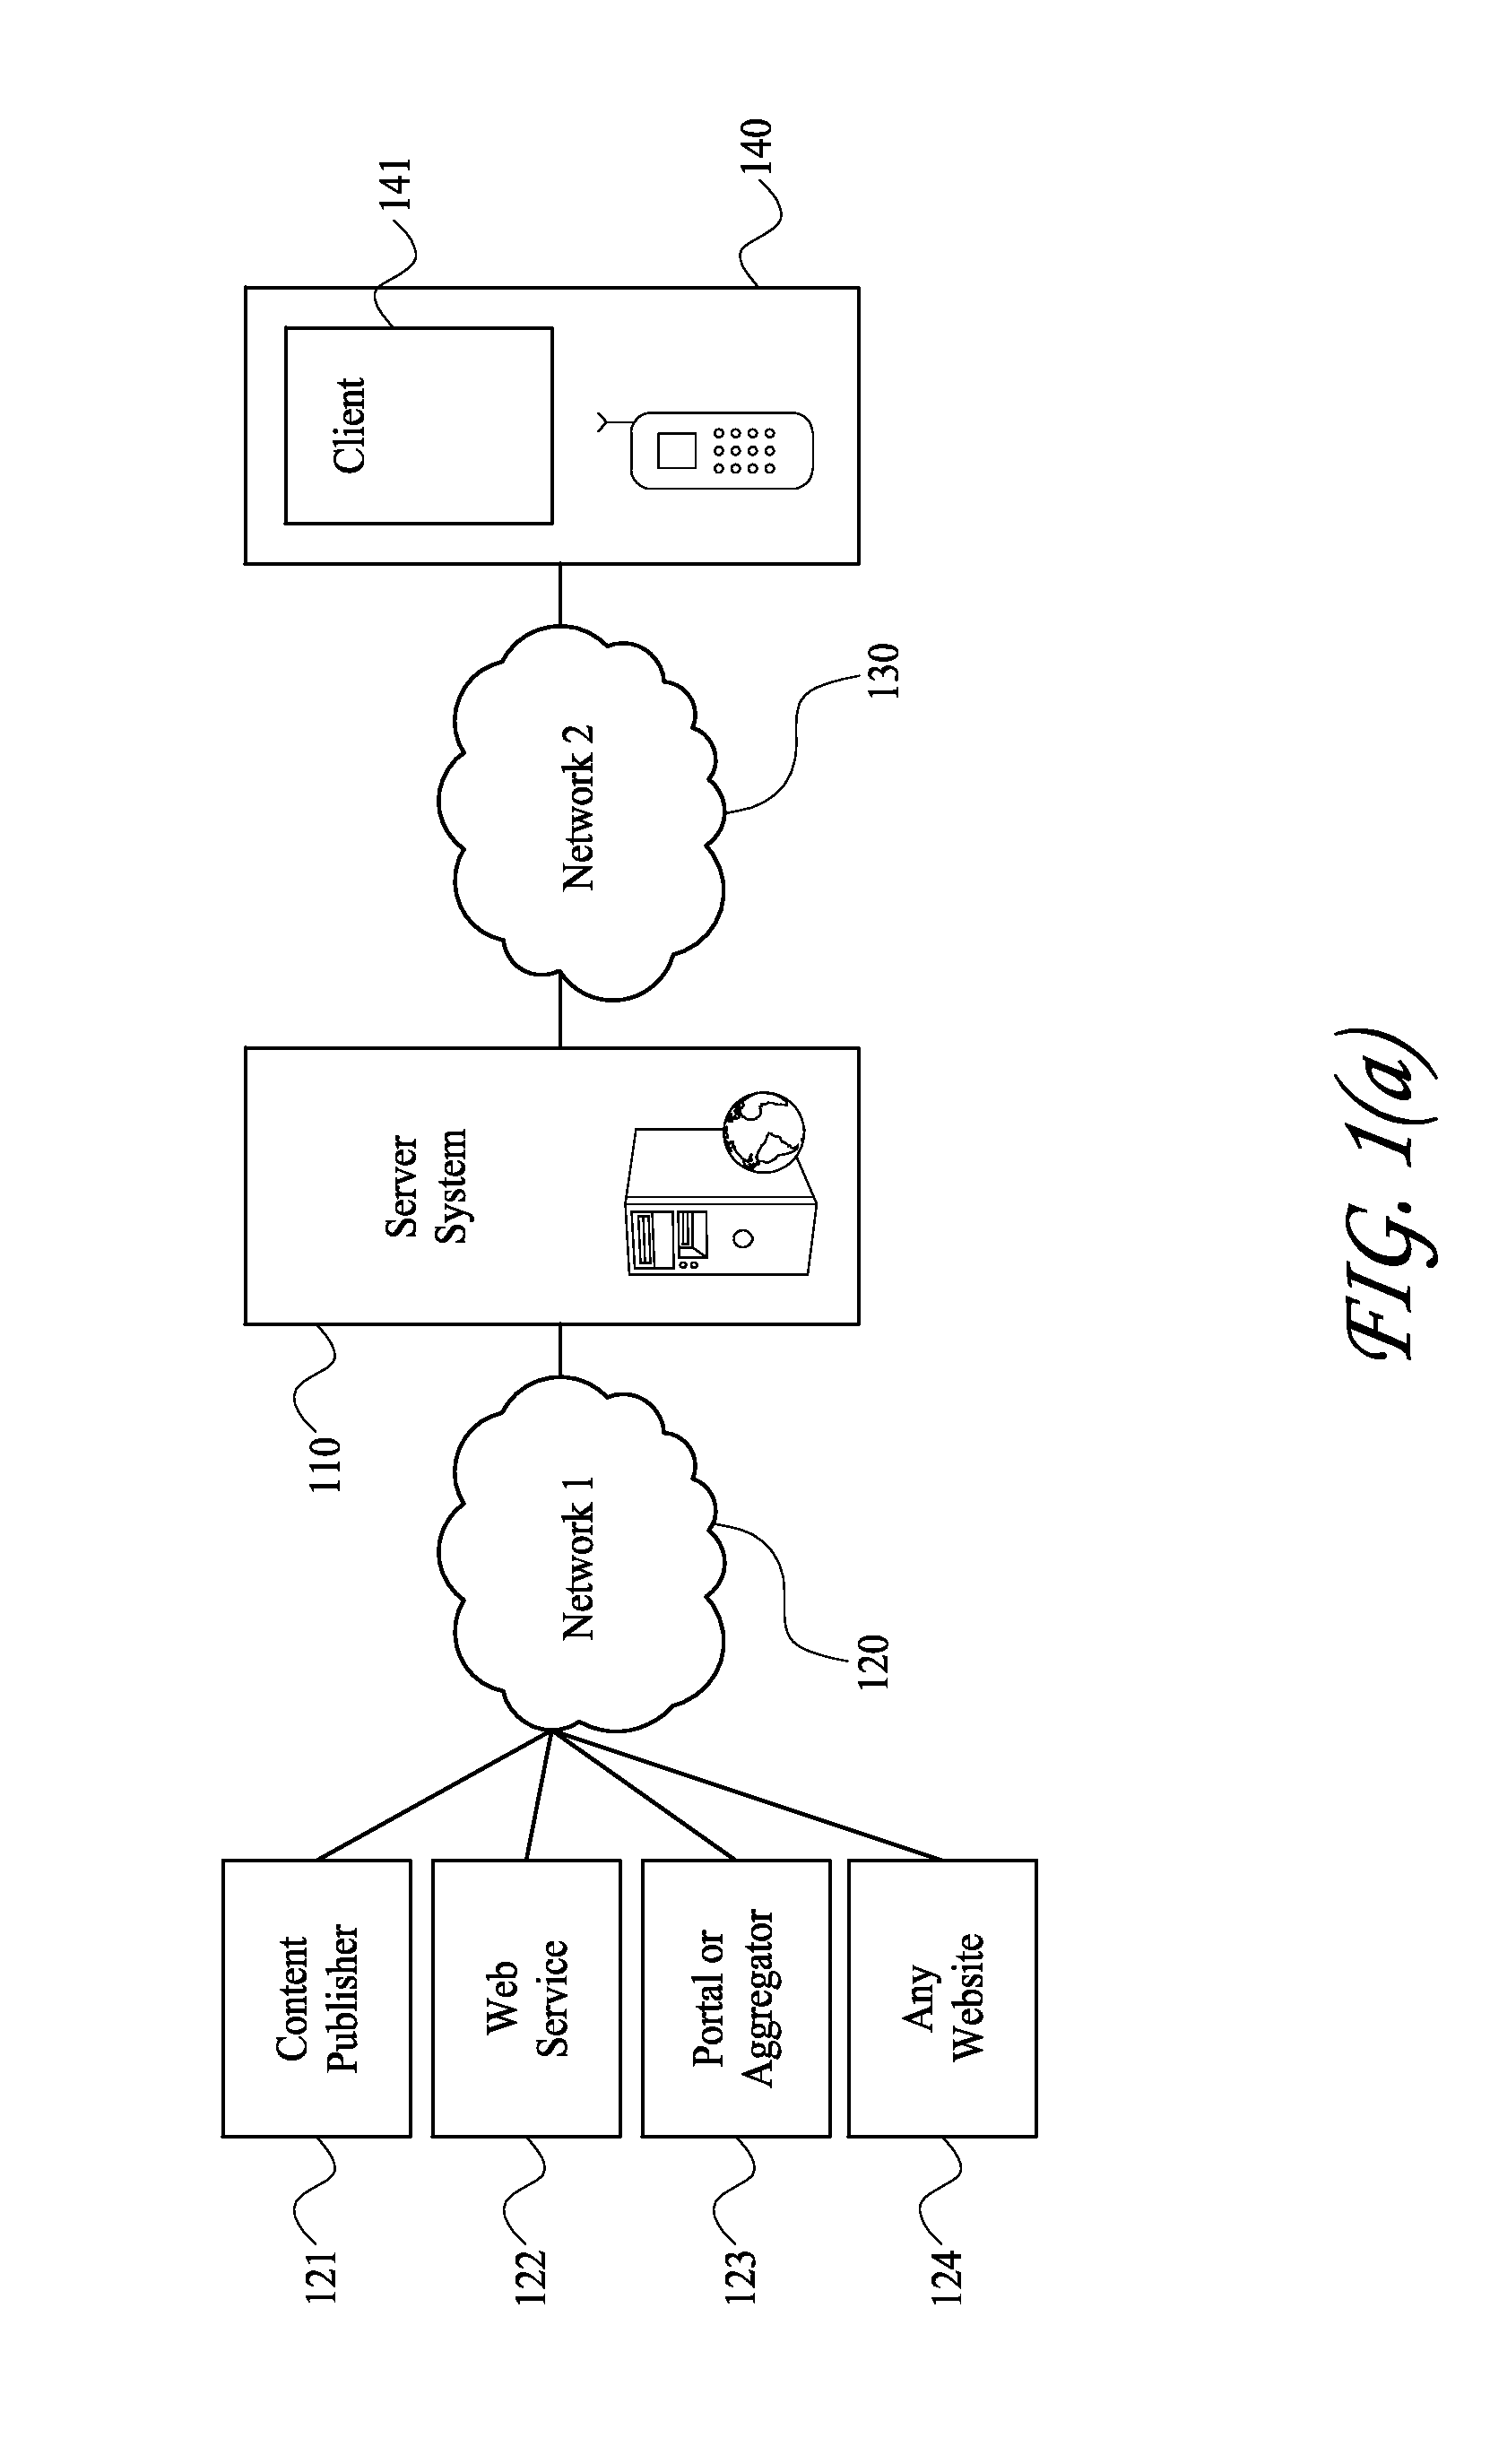 System and method for building and delivering mobile widgets